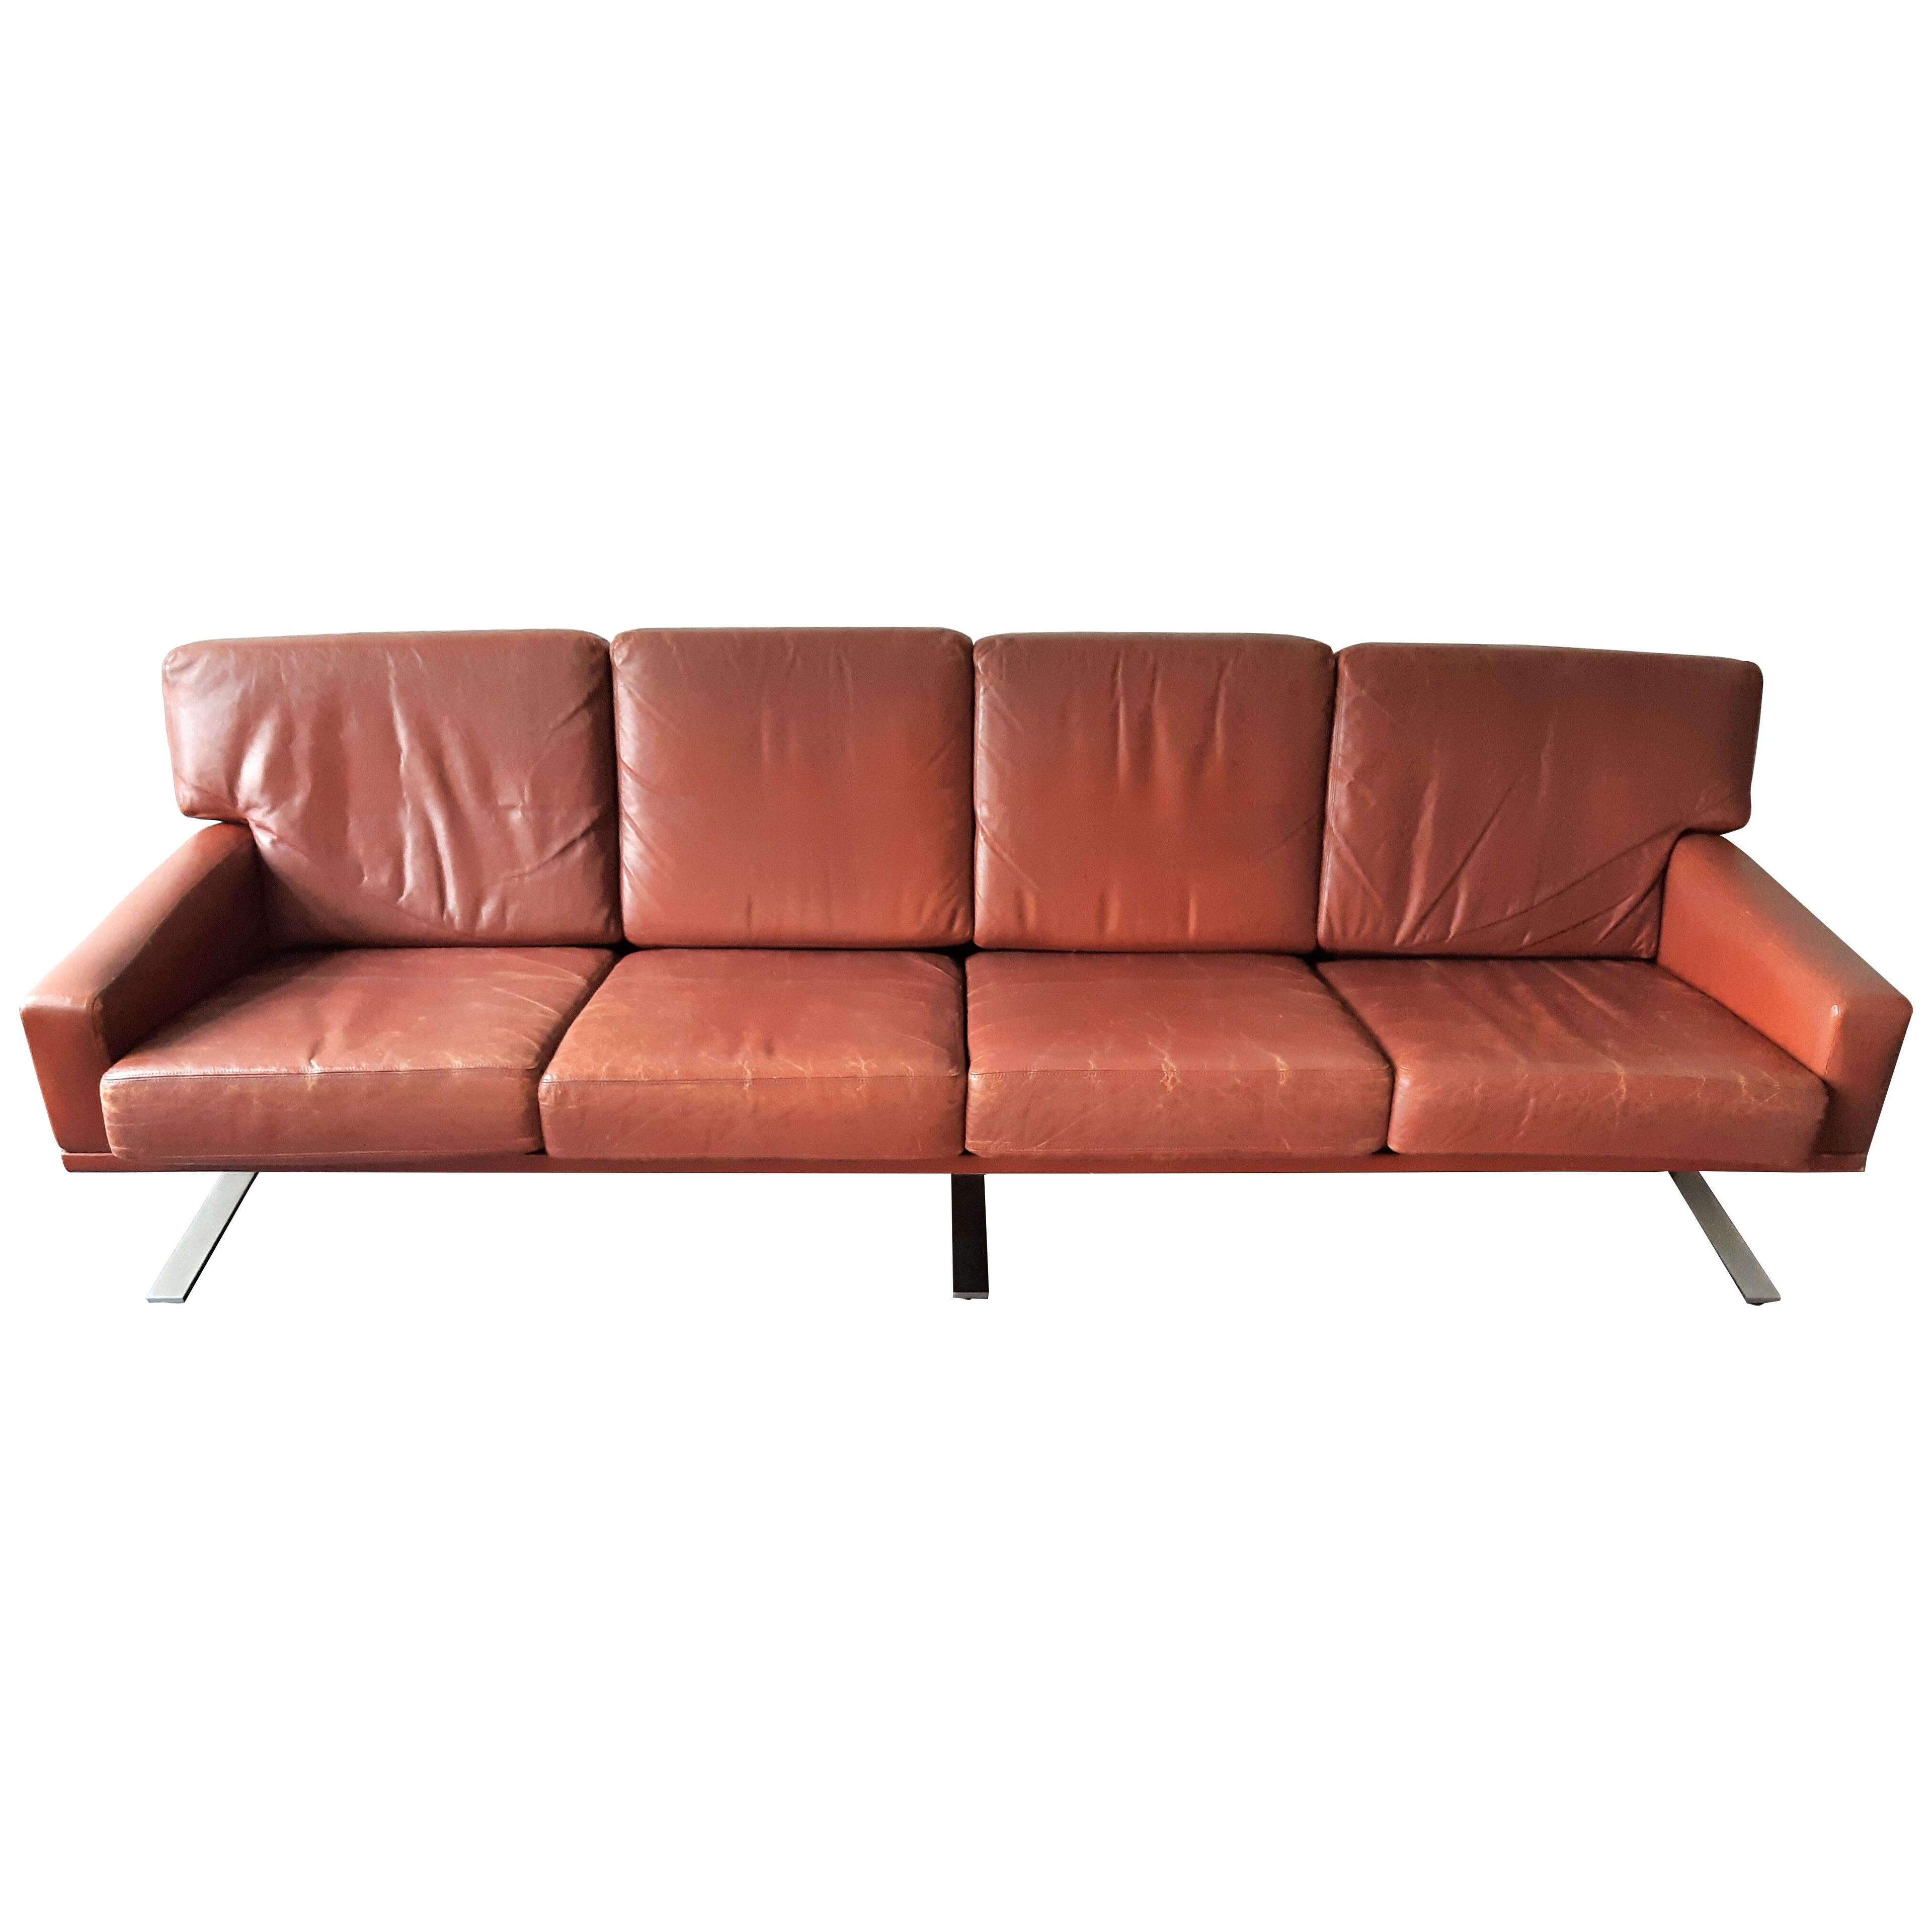 Scandinavian 4-Seater Sofa in Red-Brown Leather, 1960's